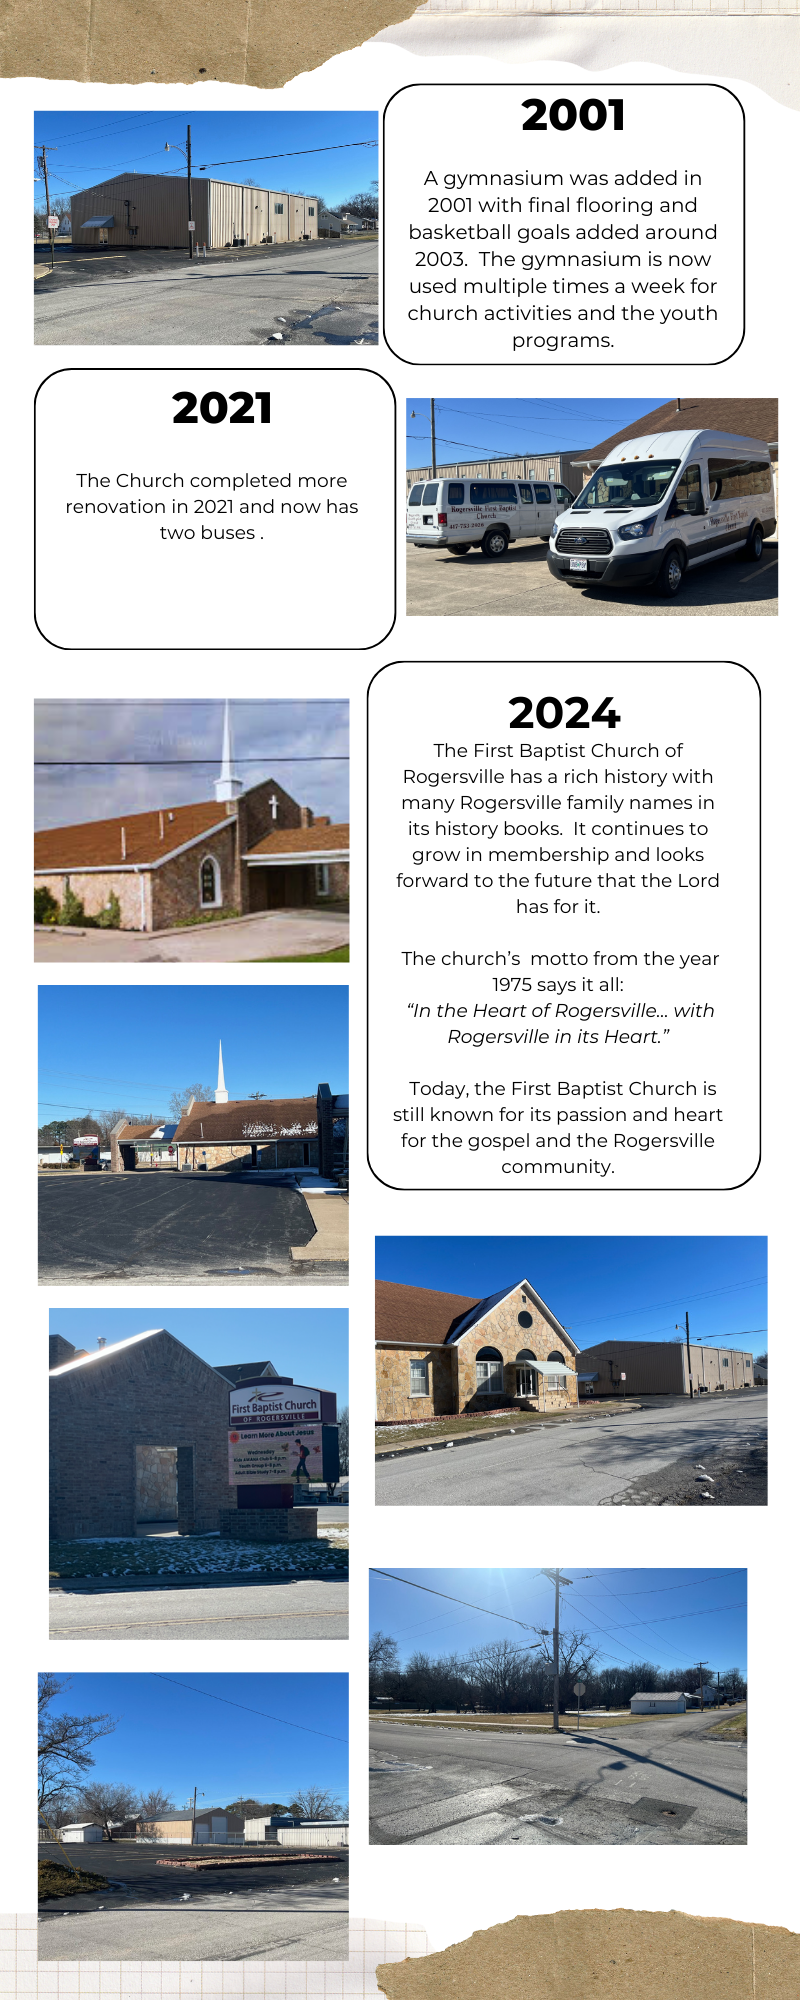 Church History Timeline page 2